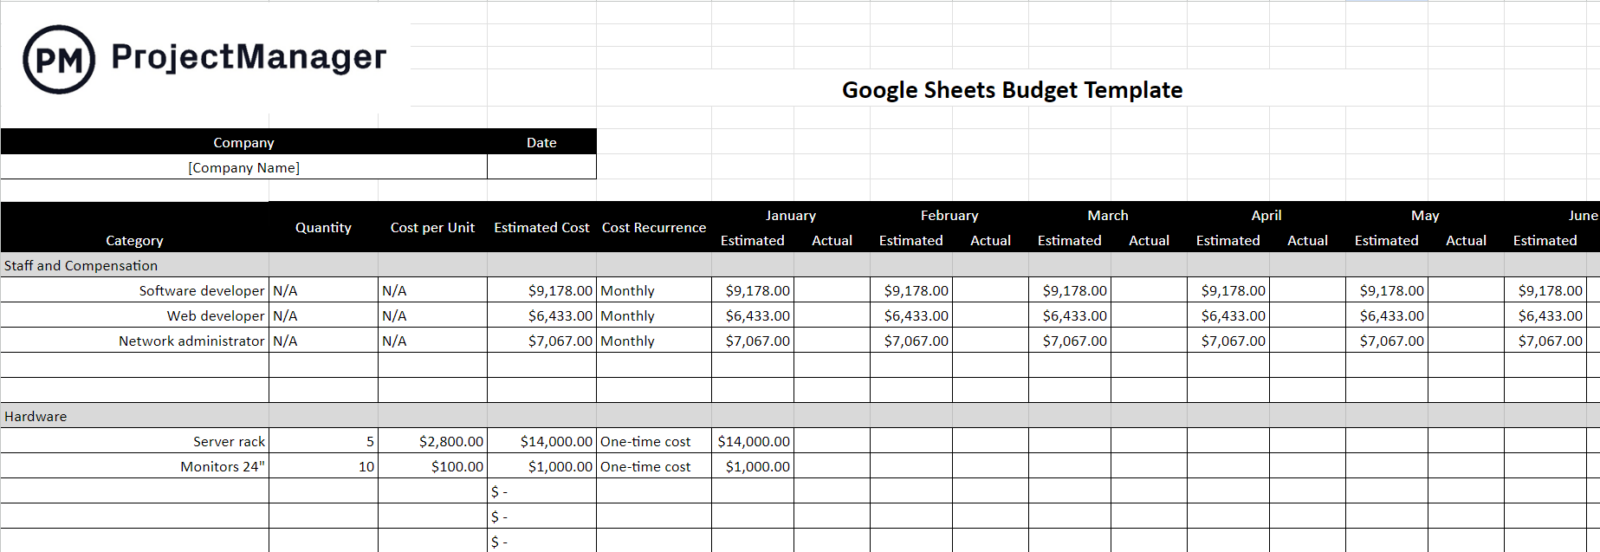 Budget Template for Google Sheets